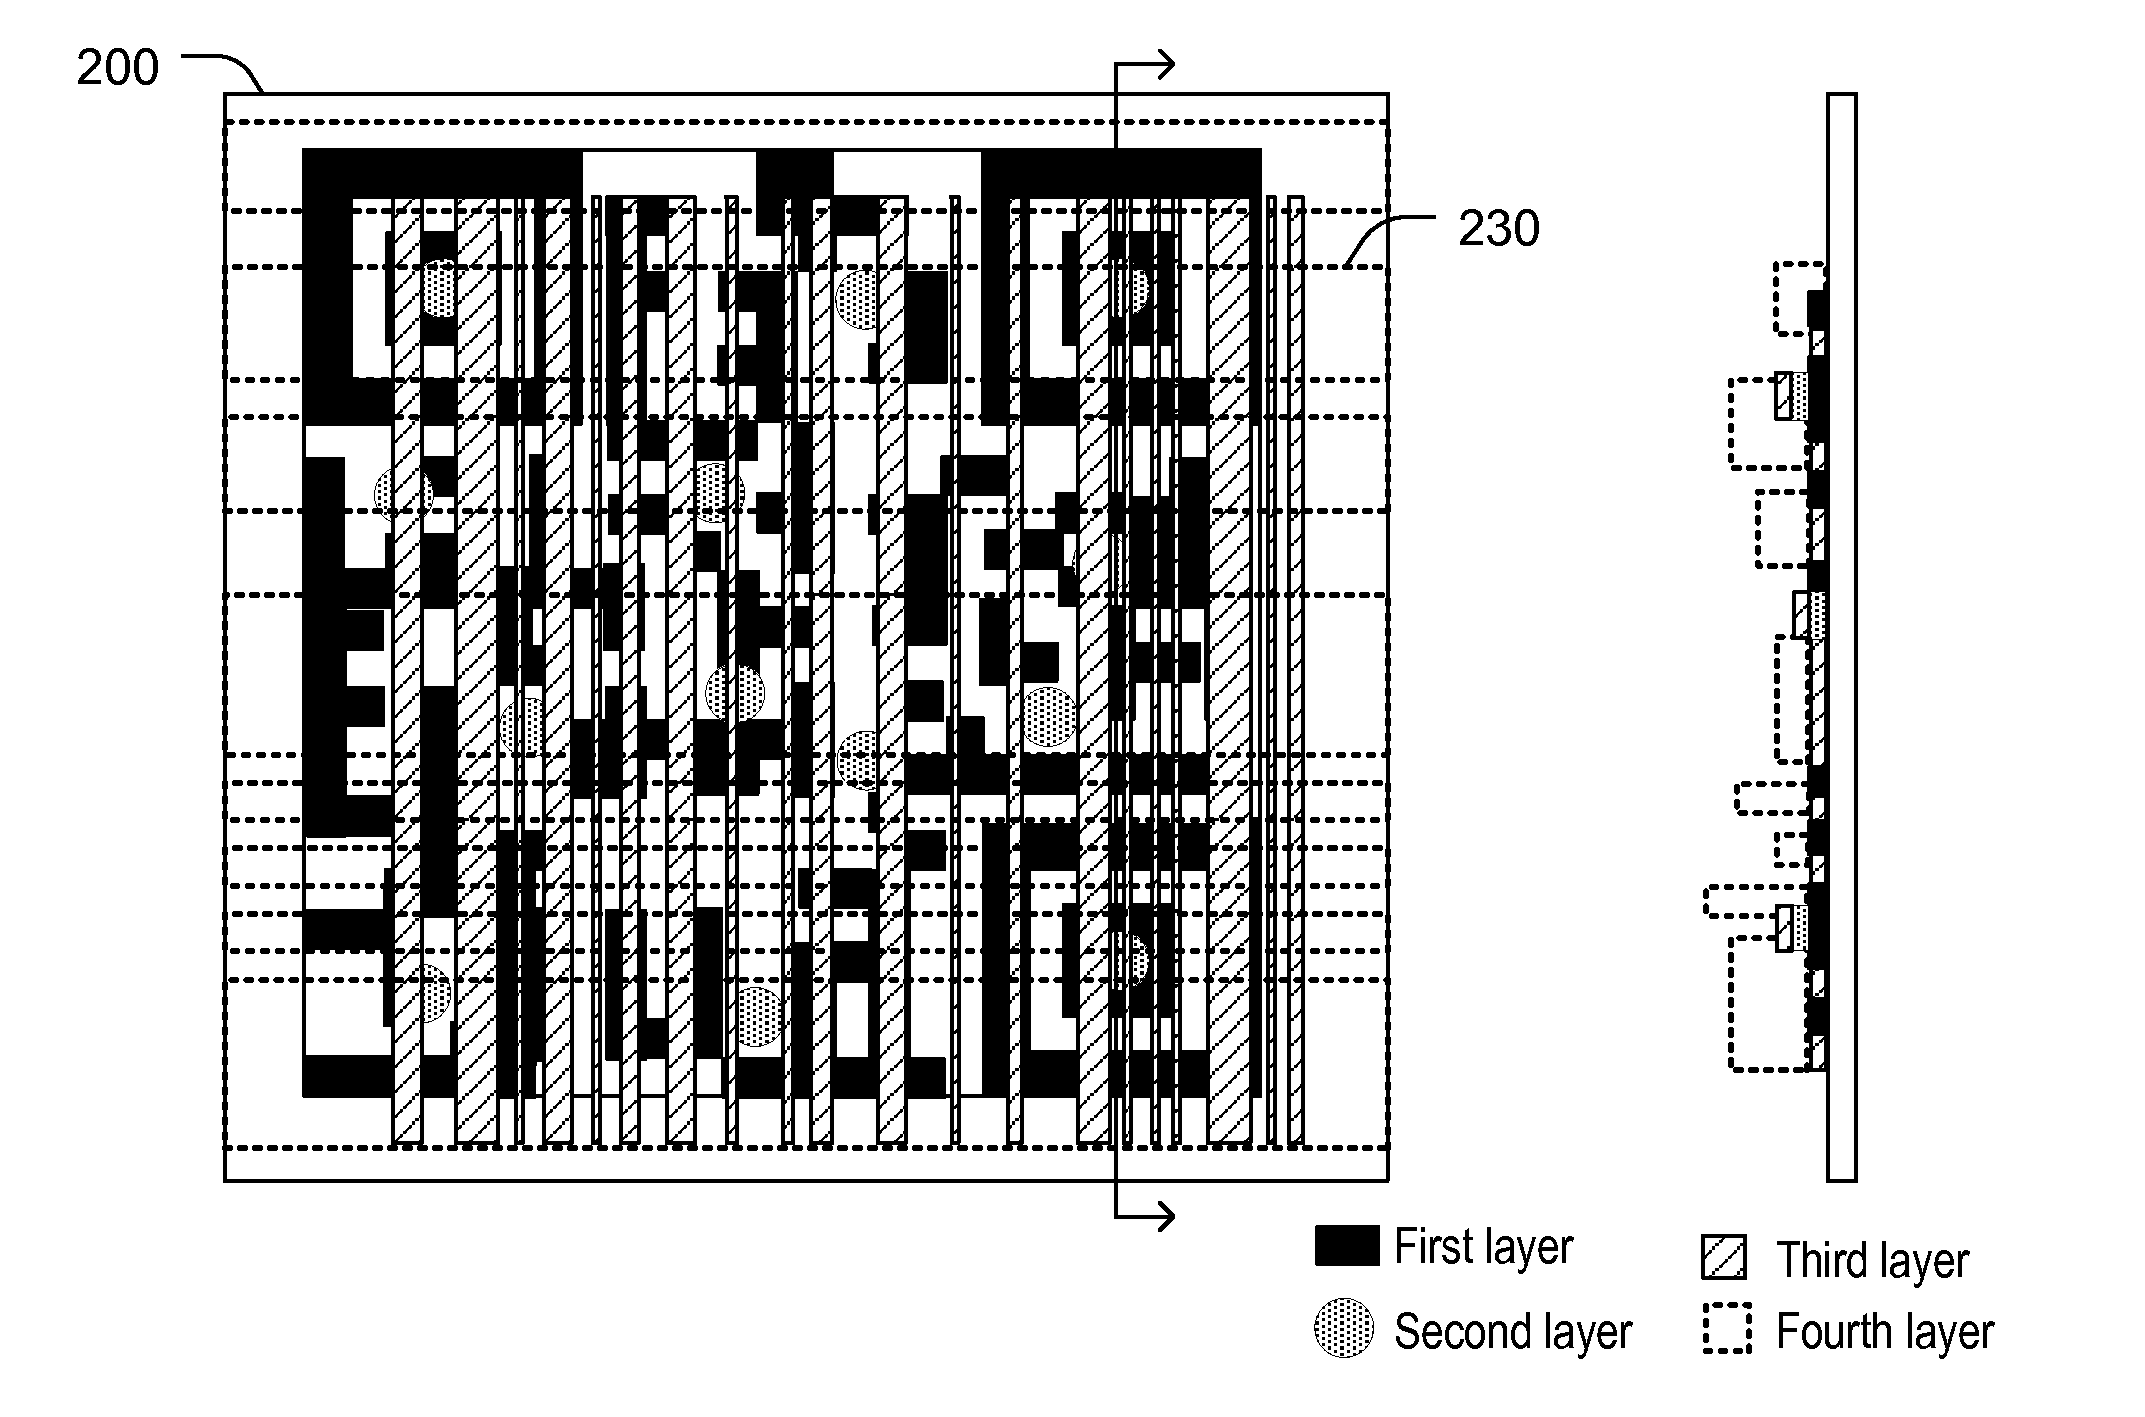 Encoding information in multiple patterned layers